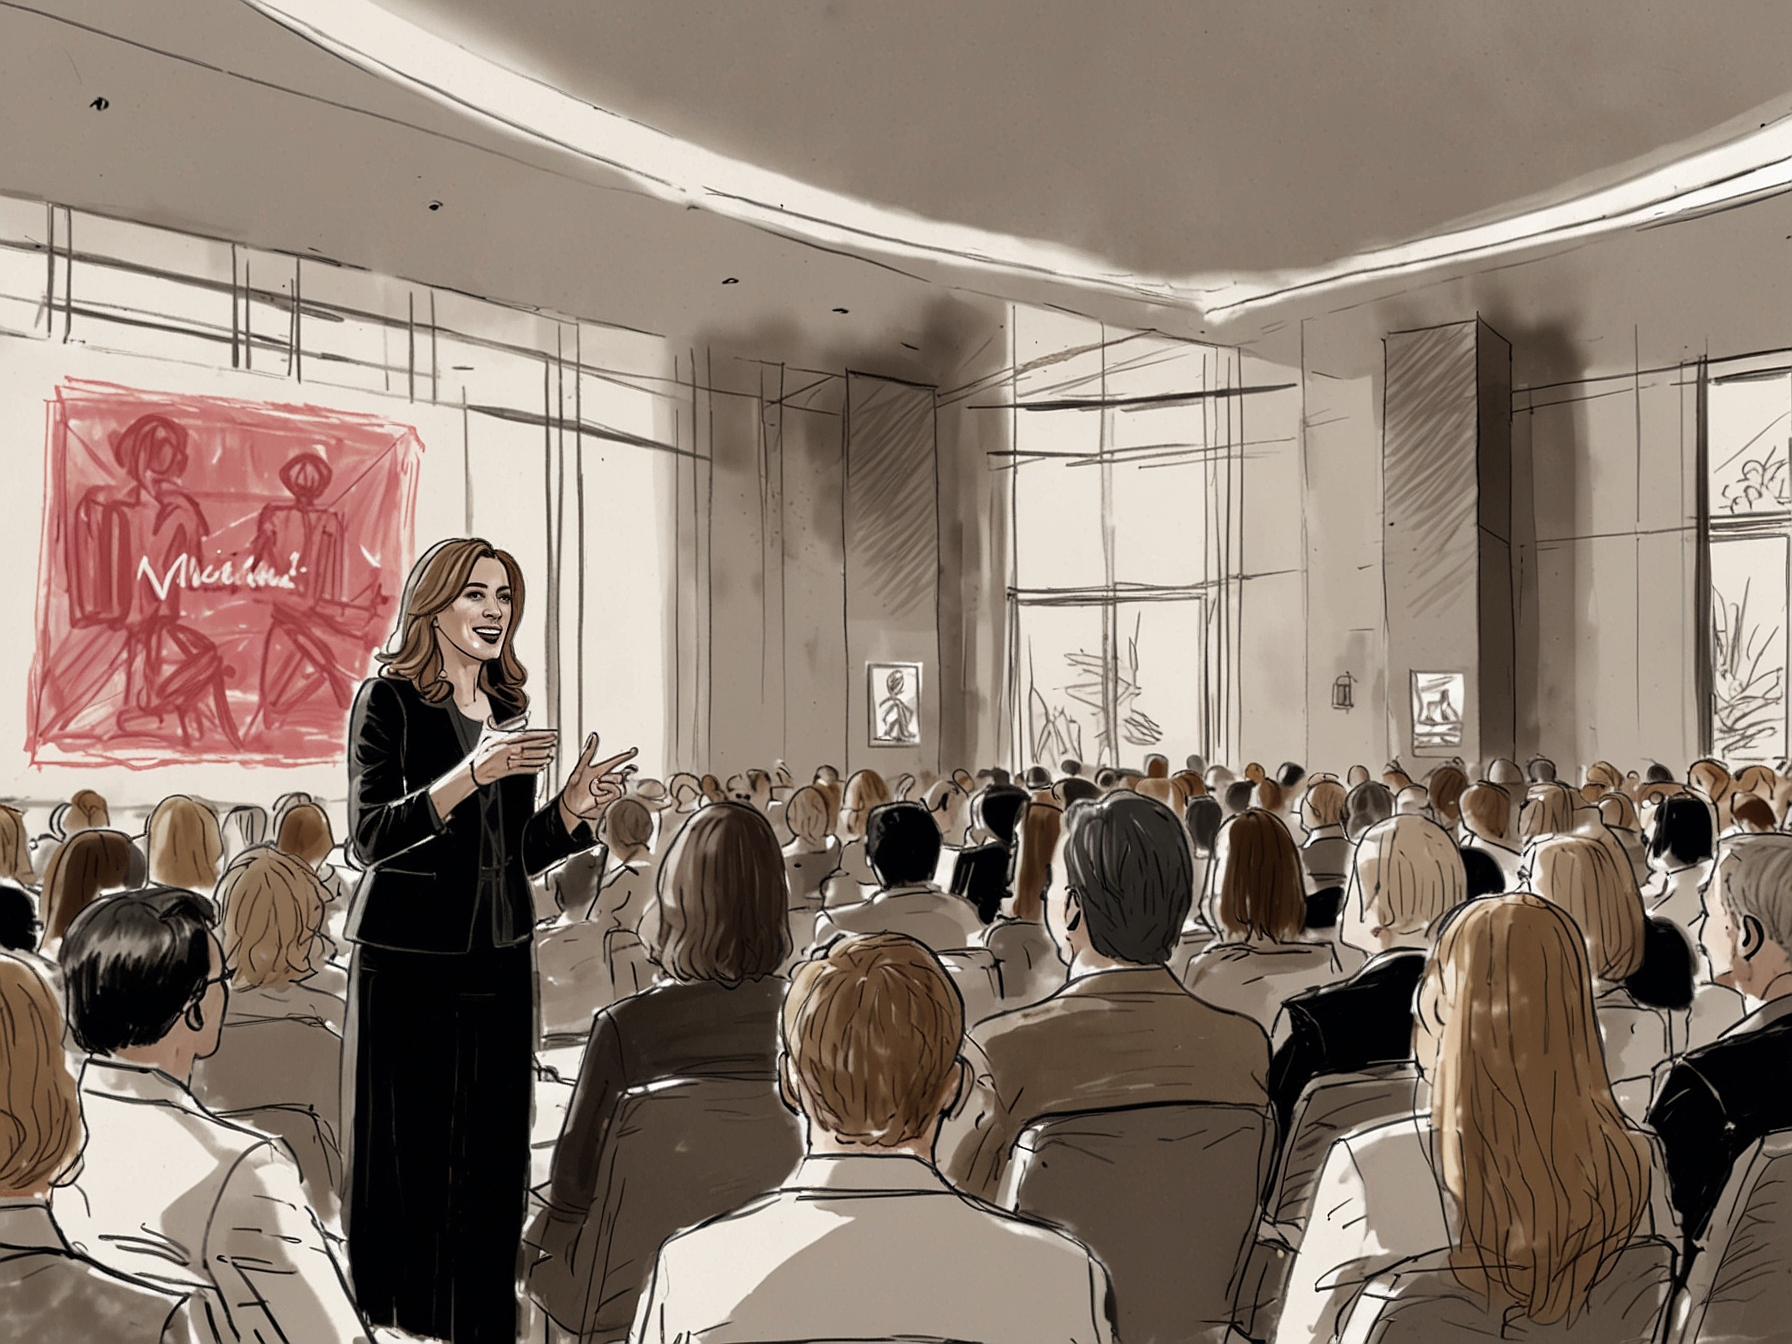 Vanessa Kuykendall, newly appointed Chief Engagement Officer at Market Defense, addressing a room filled with executives and beauty brand representatives during the announcement event.